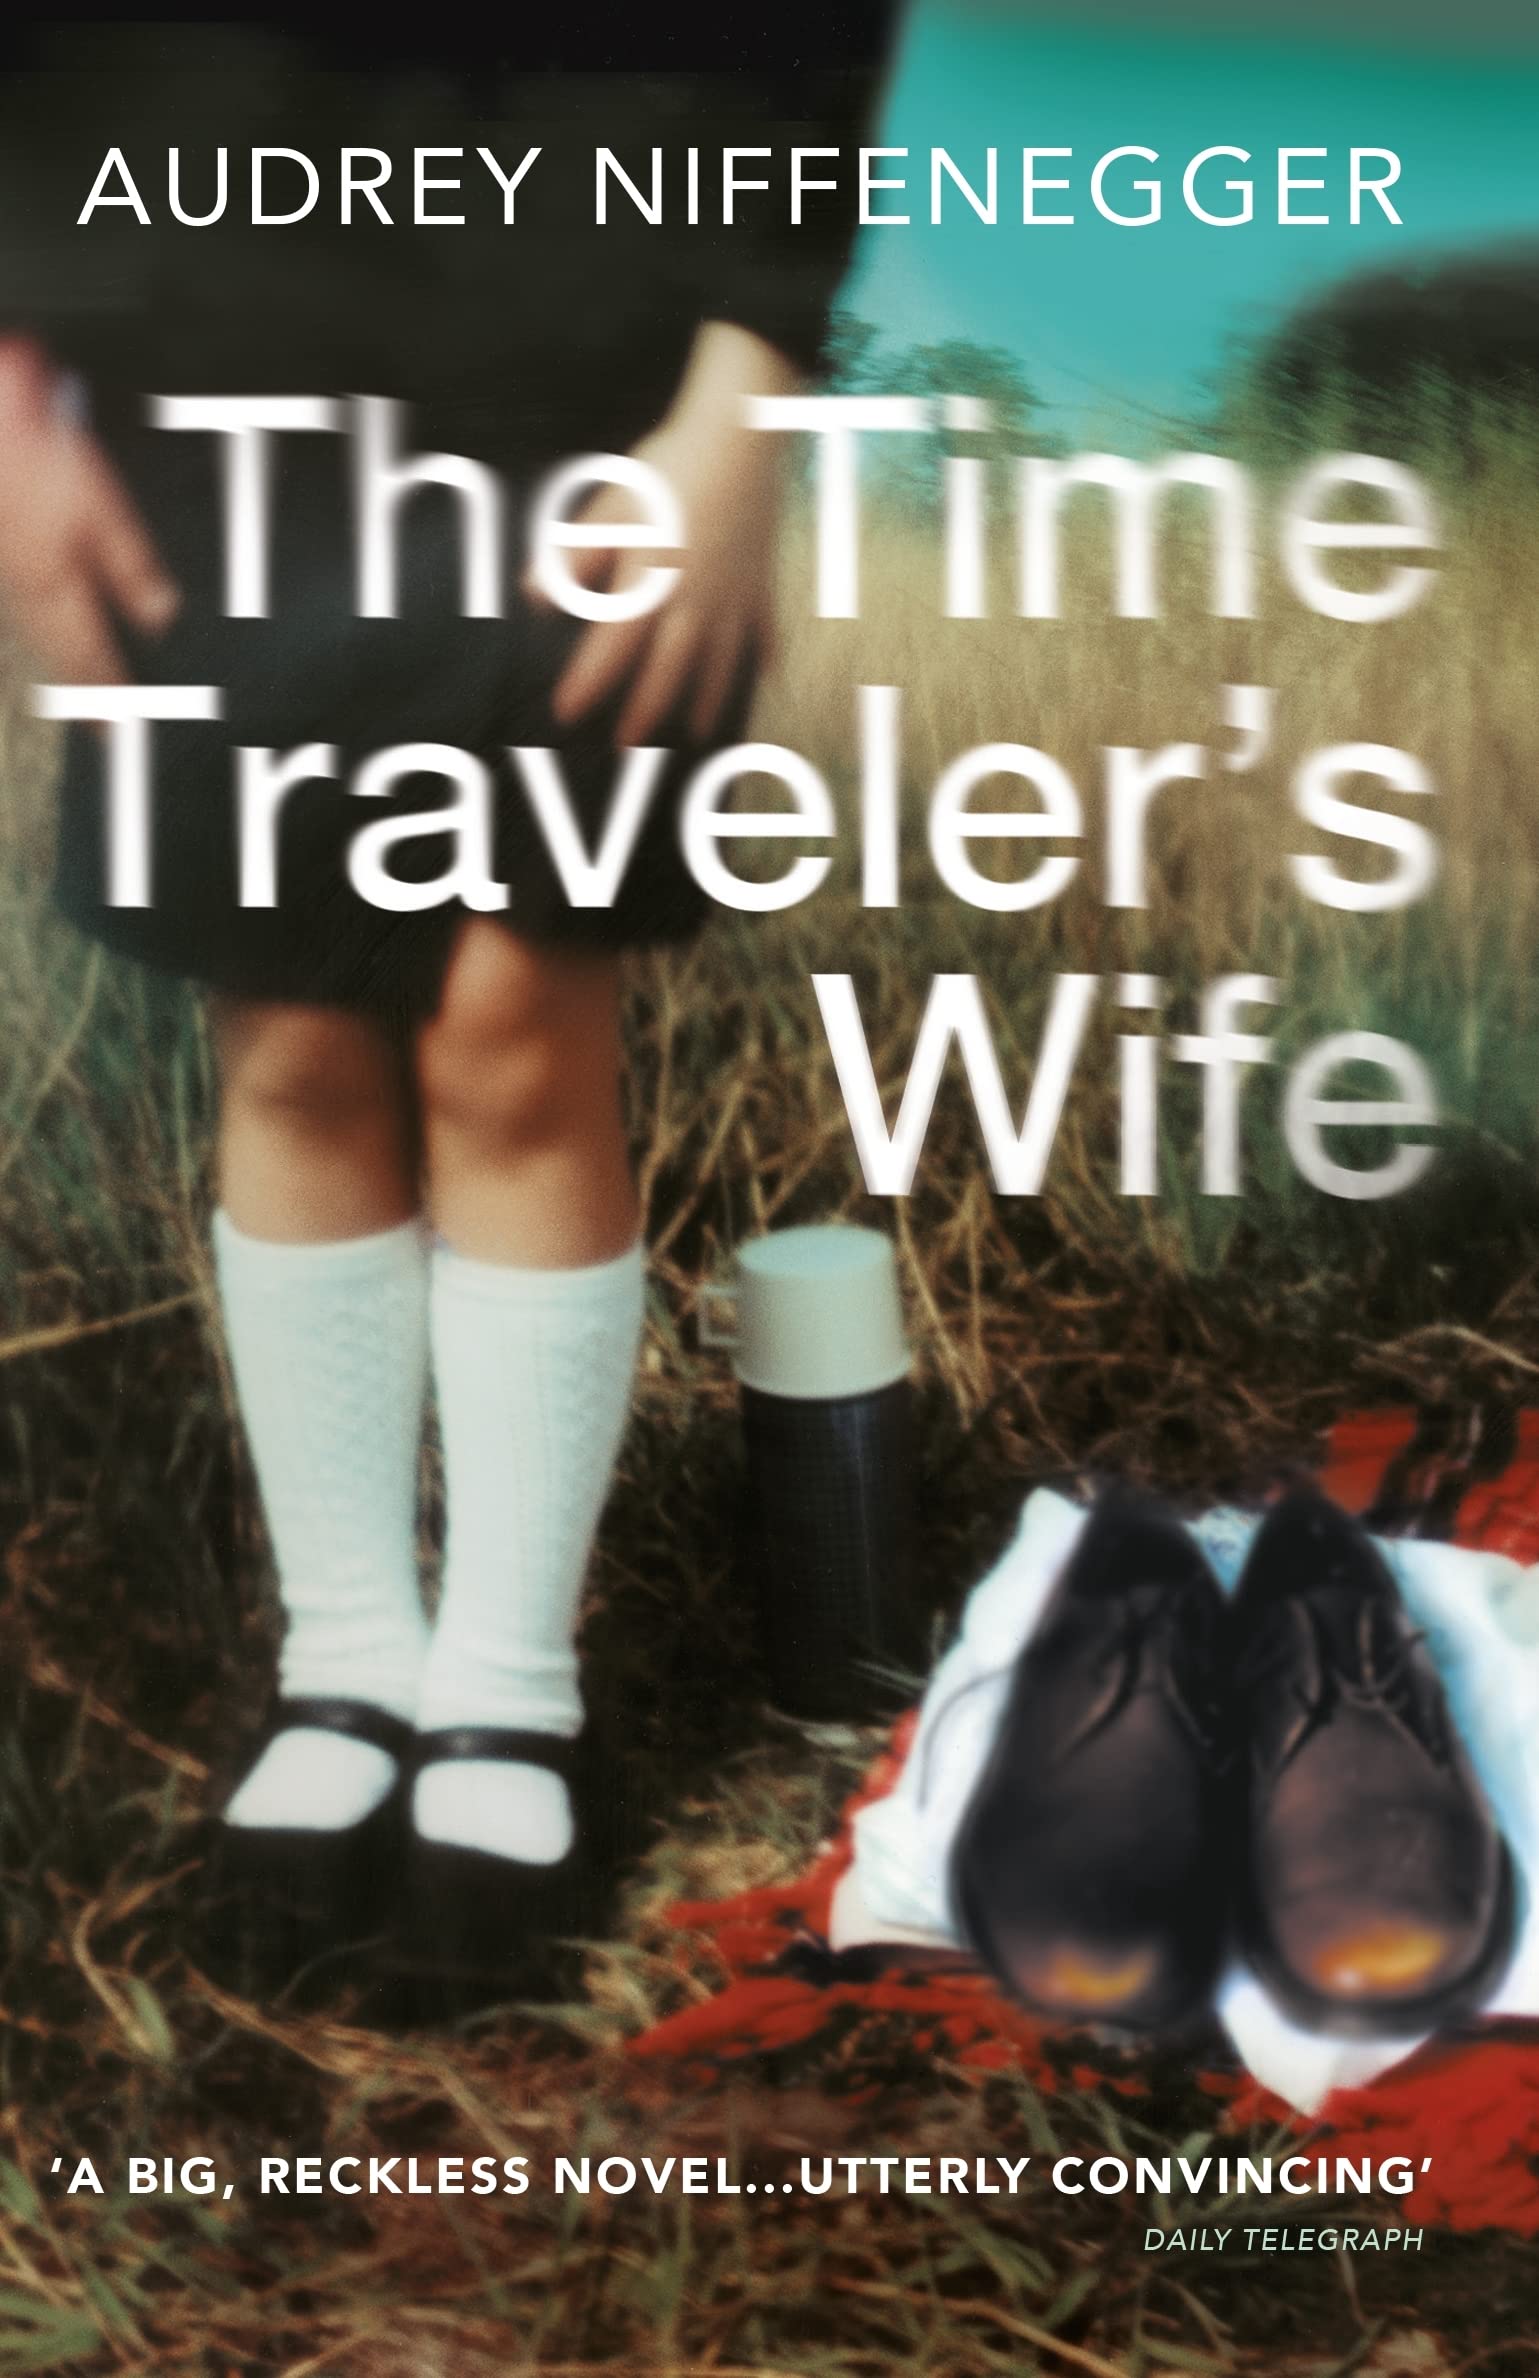 Laurel Lefkow, Audrey Niffenegger, William Hope: The Time Traveler's Wife (2013)